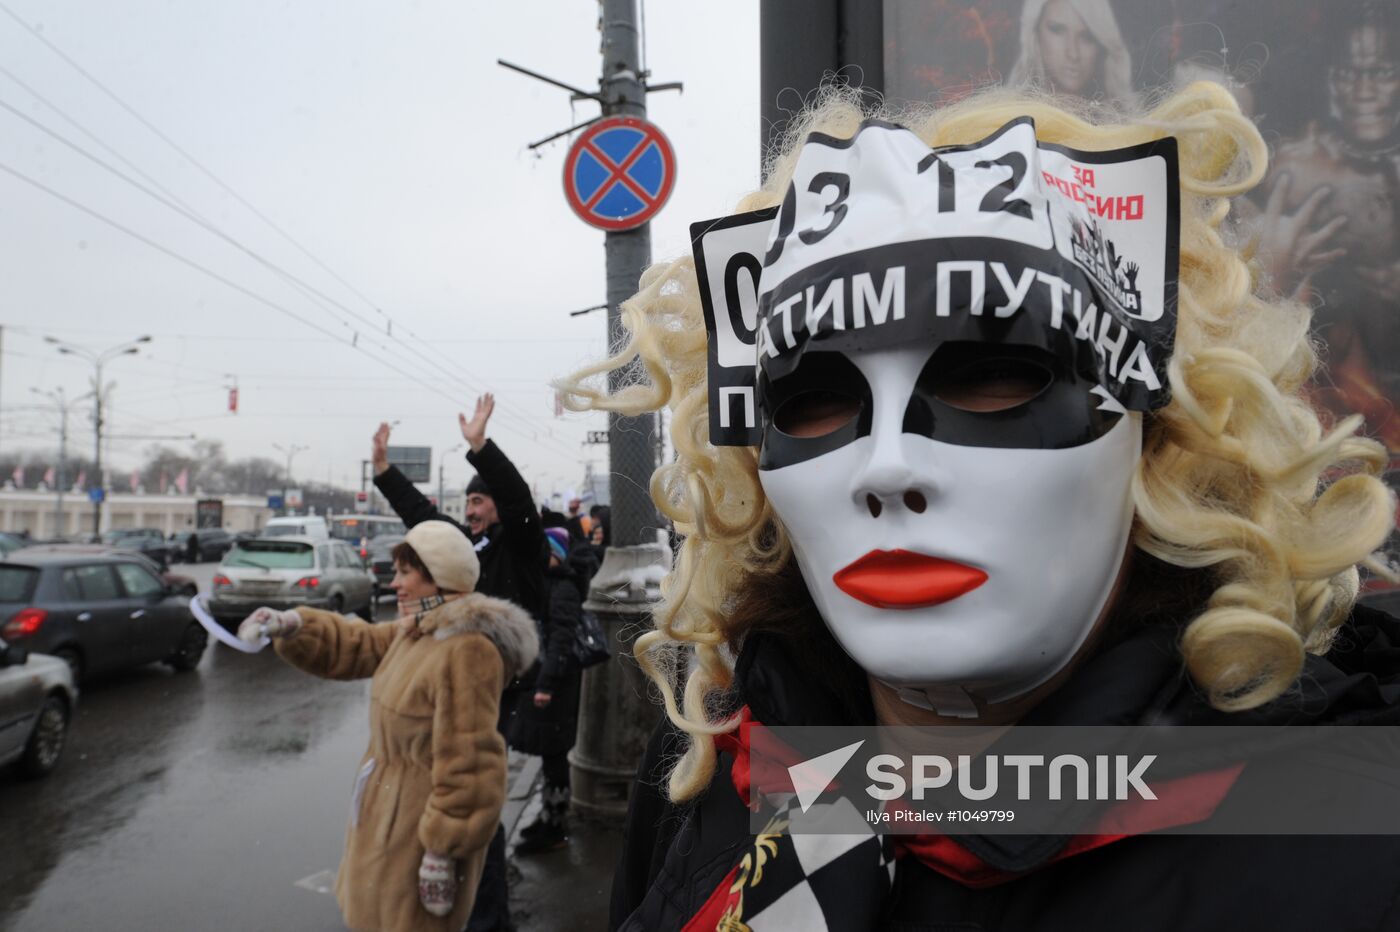 White Circle rally staged on Moscow's Garden Ring